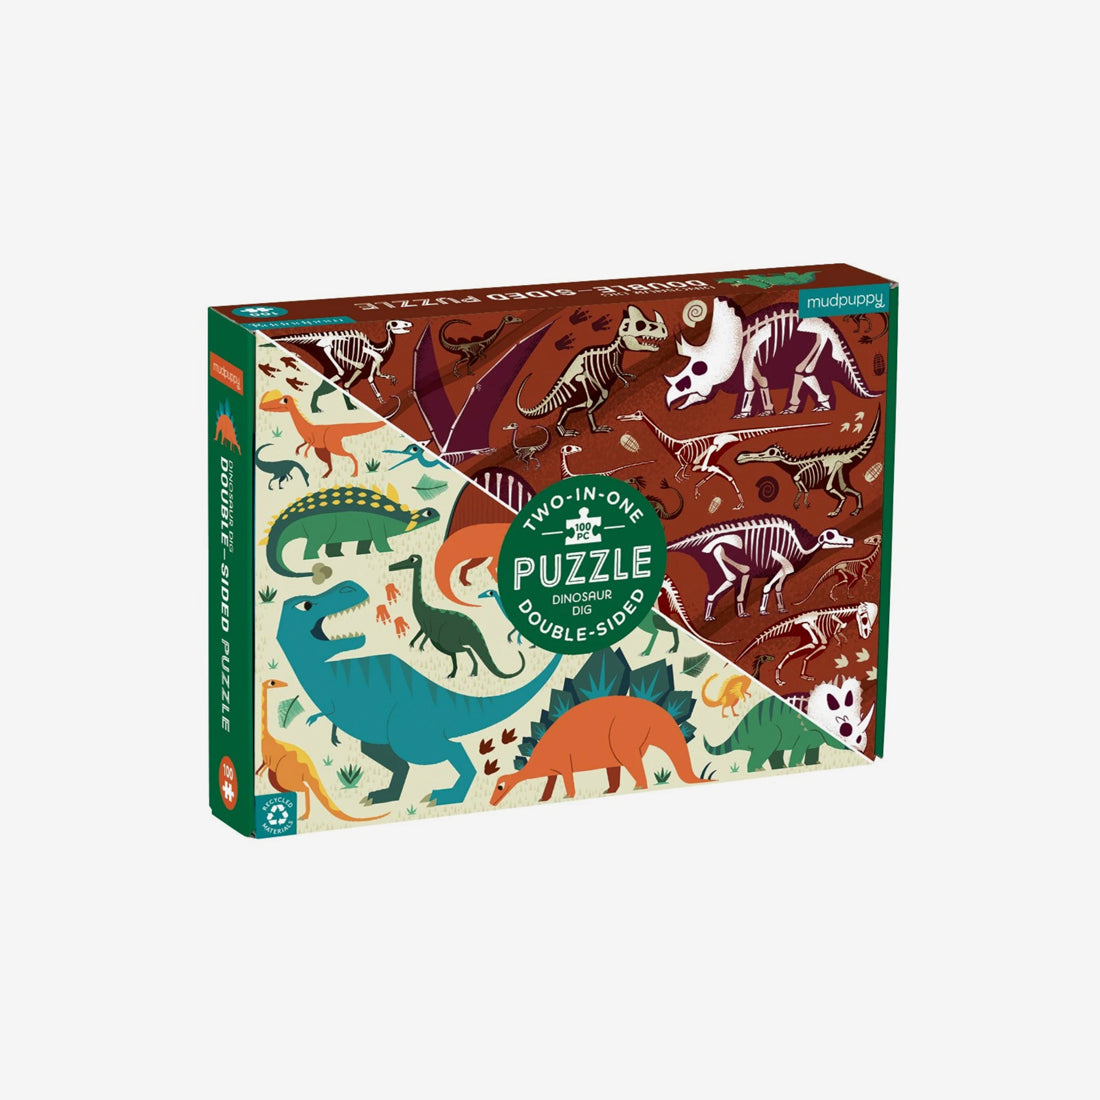 100-Piece Double-Sided Puzzle - Dinosaur Dig